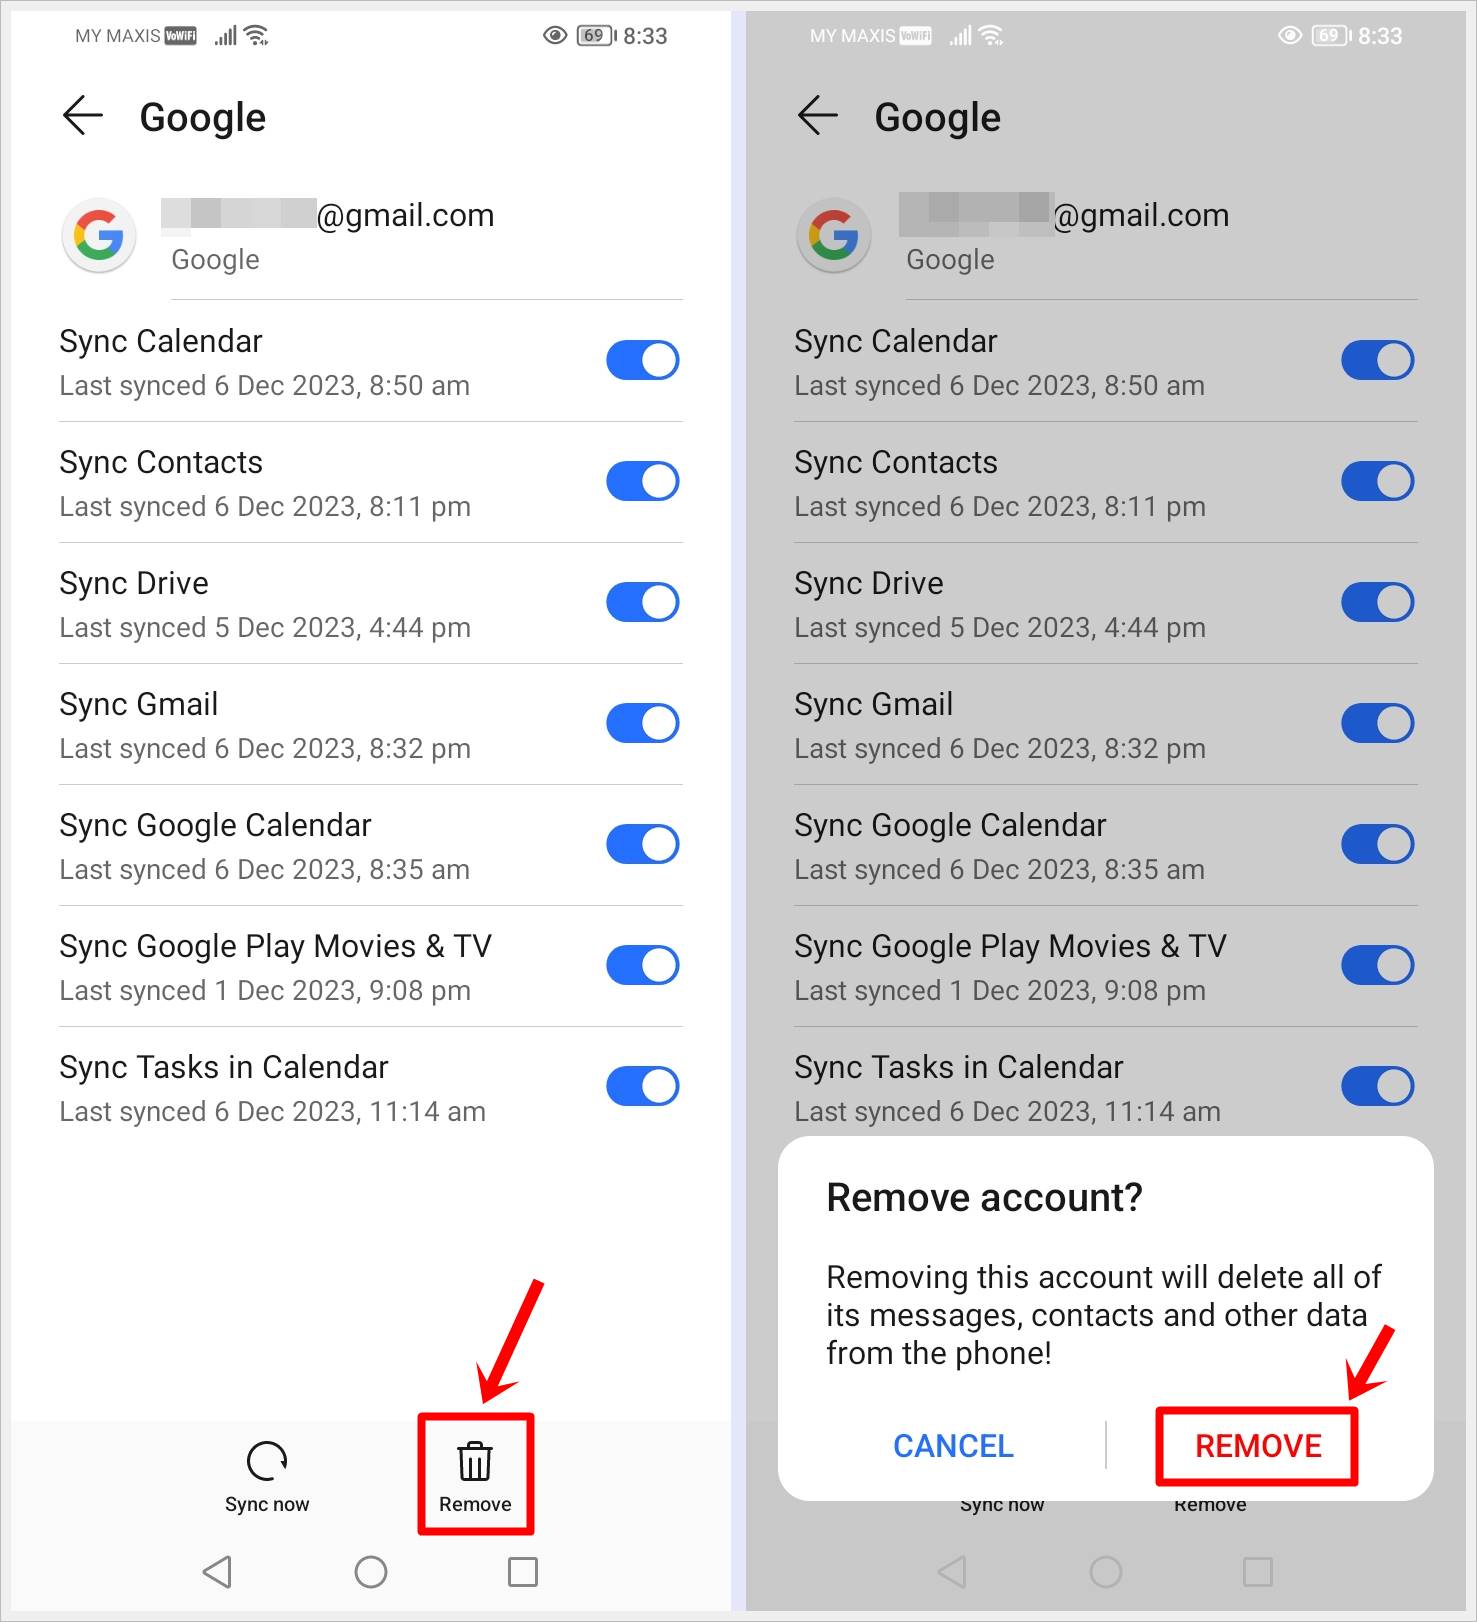 How to Fix "Google Play Services Keeps Stopping" Error: This image displays two screenshots of the "Google" page on an Android phone: one with the "Remove" icon in the bottom highlighted, while the other highlights the "Confirm remove" option.